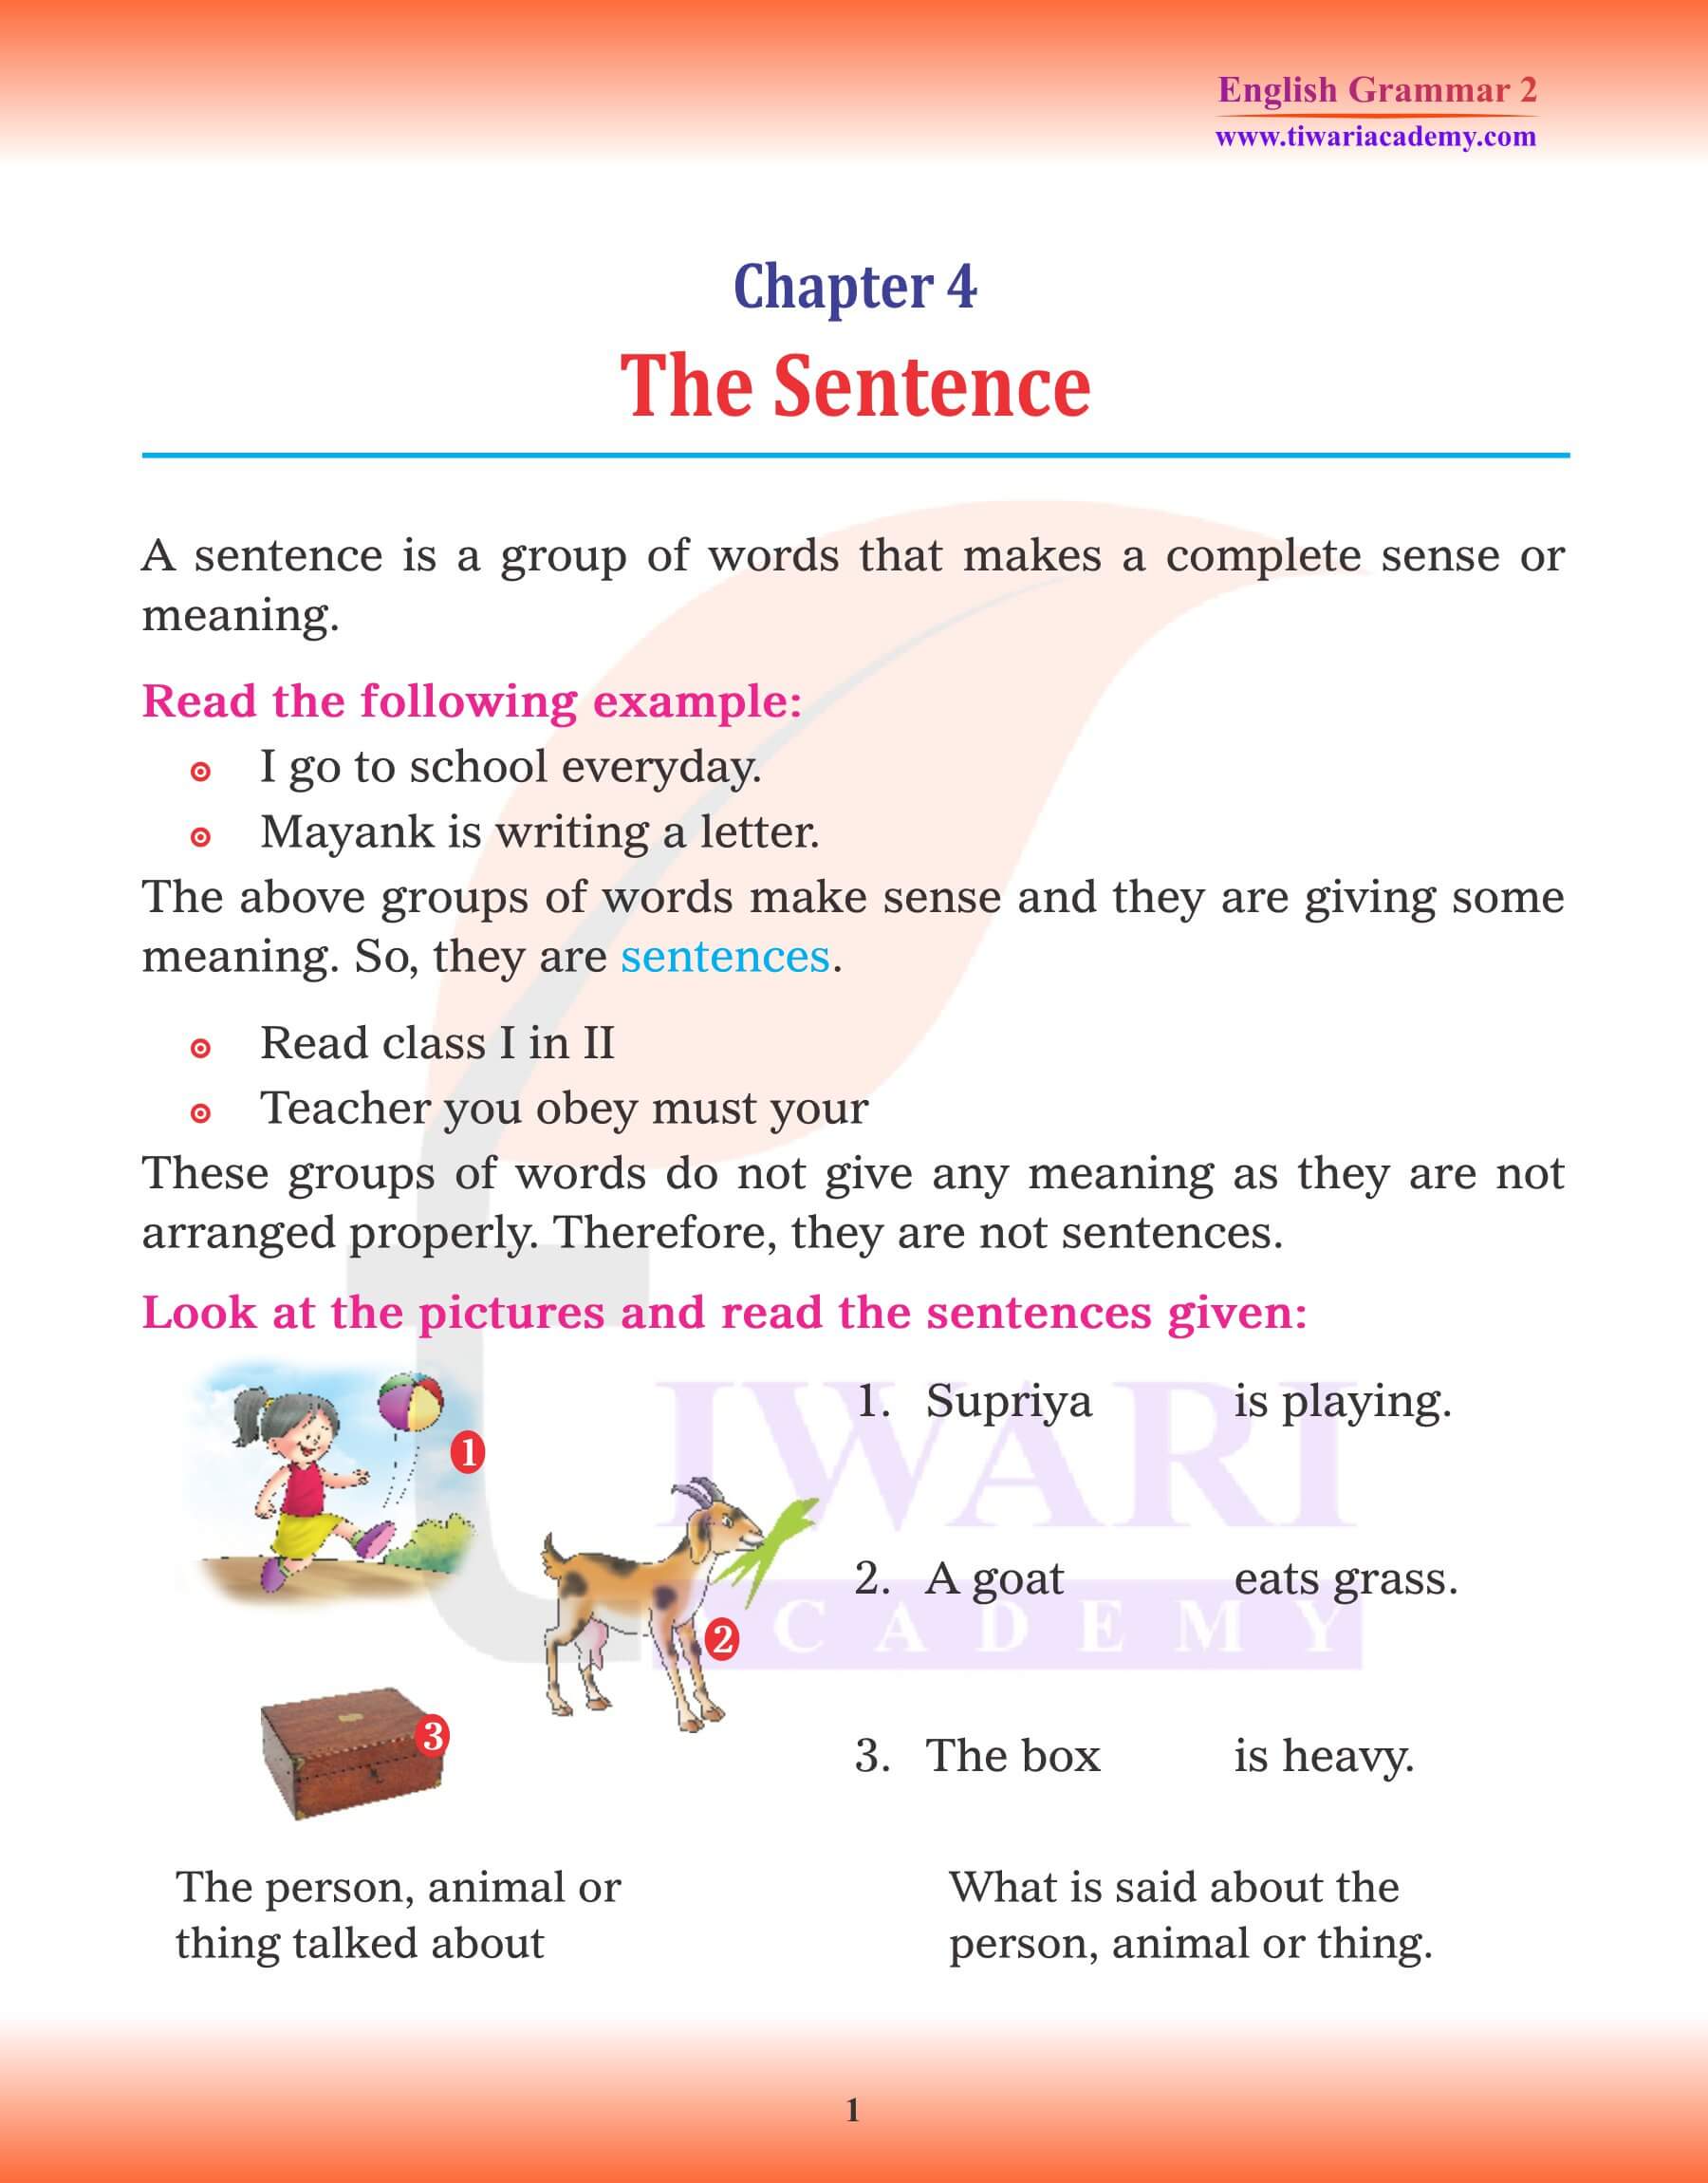 Class 2 English Grammar Chapter 4 Sentence and Phrase